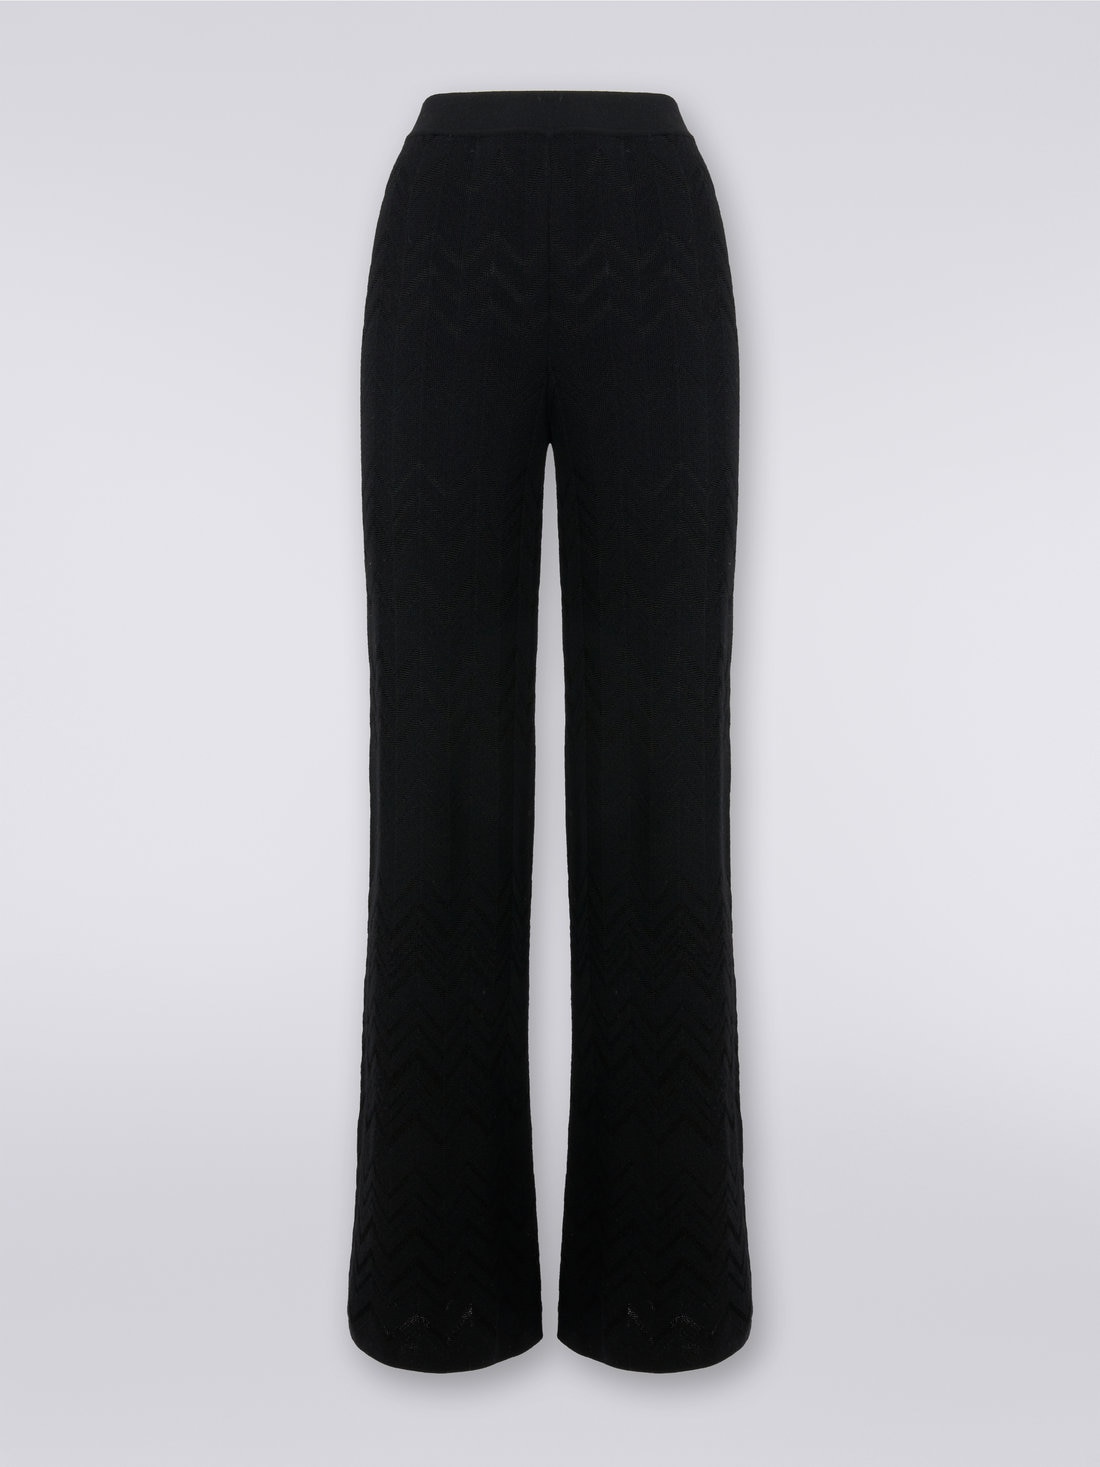 Flared English-ribbed wool and viscose chevron trousers , Black    - DS23WI0SBK027A93911 - 0